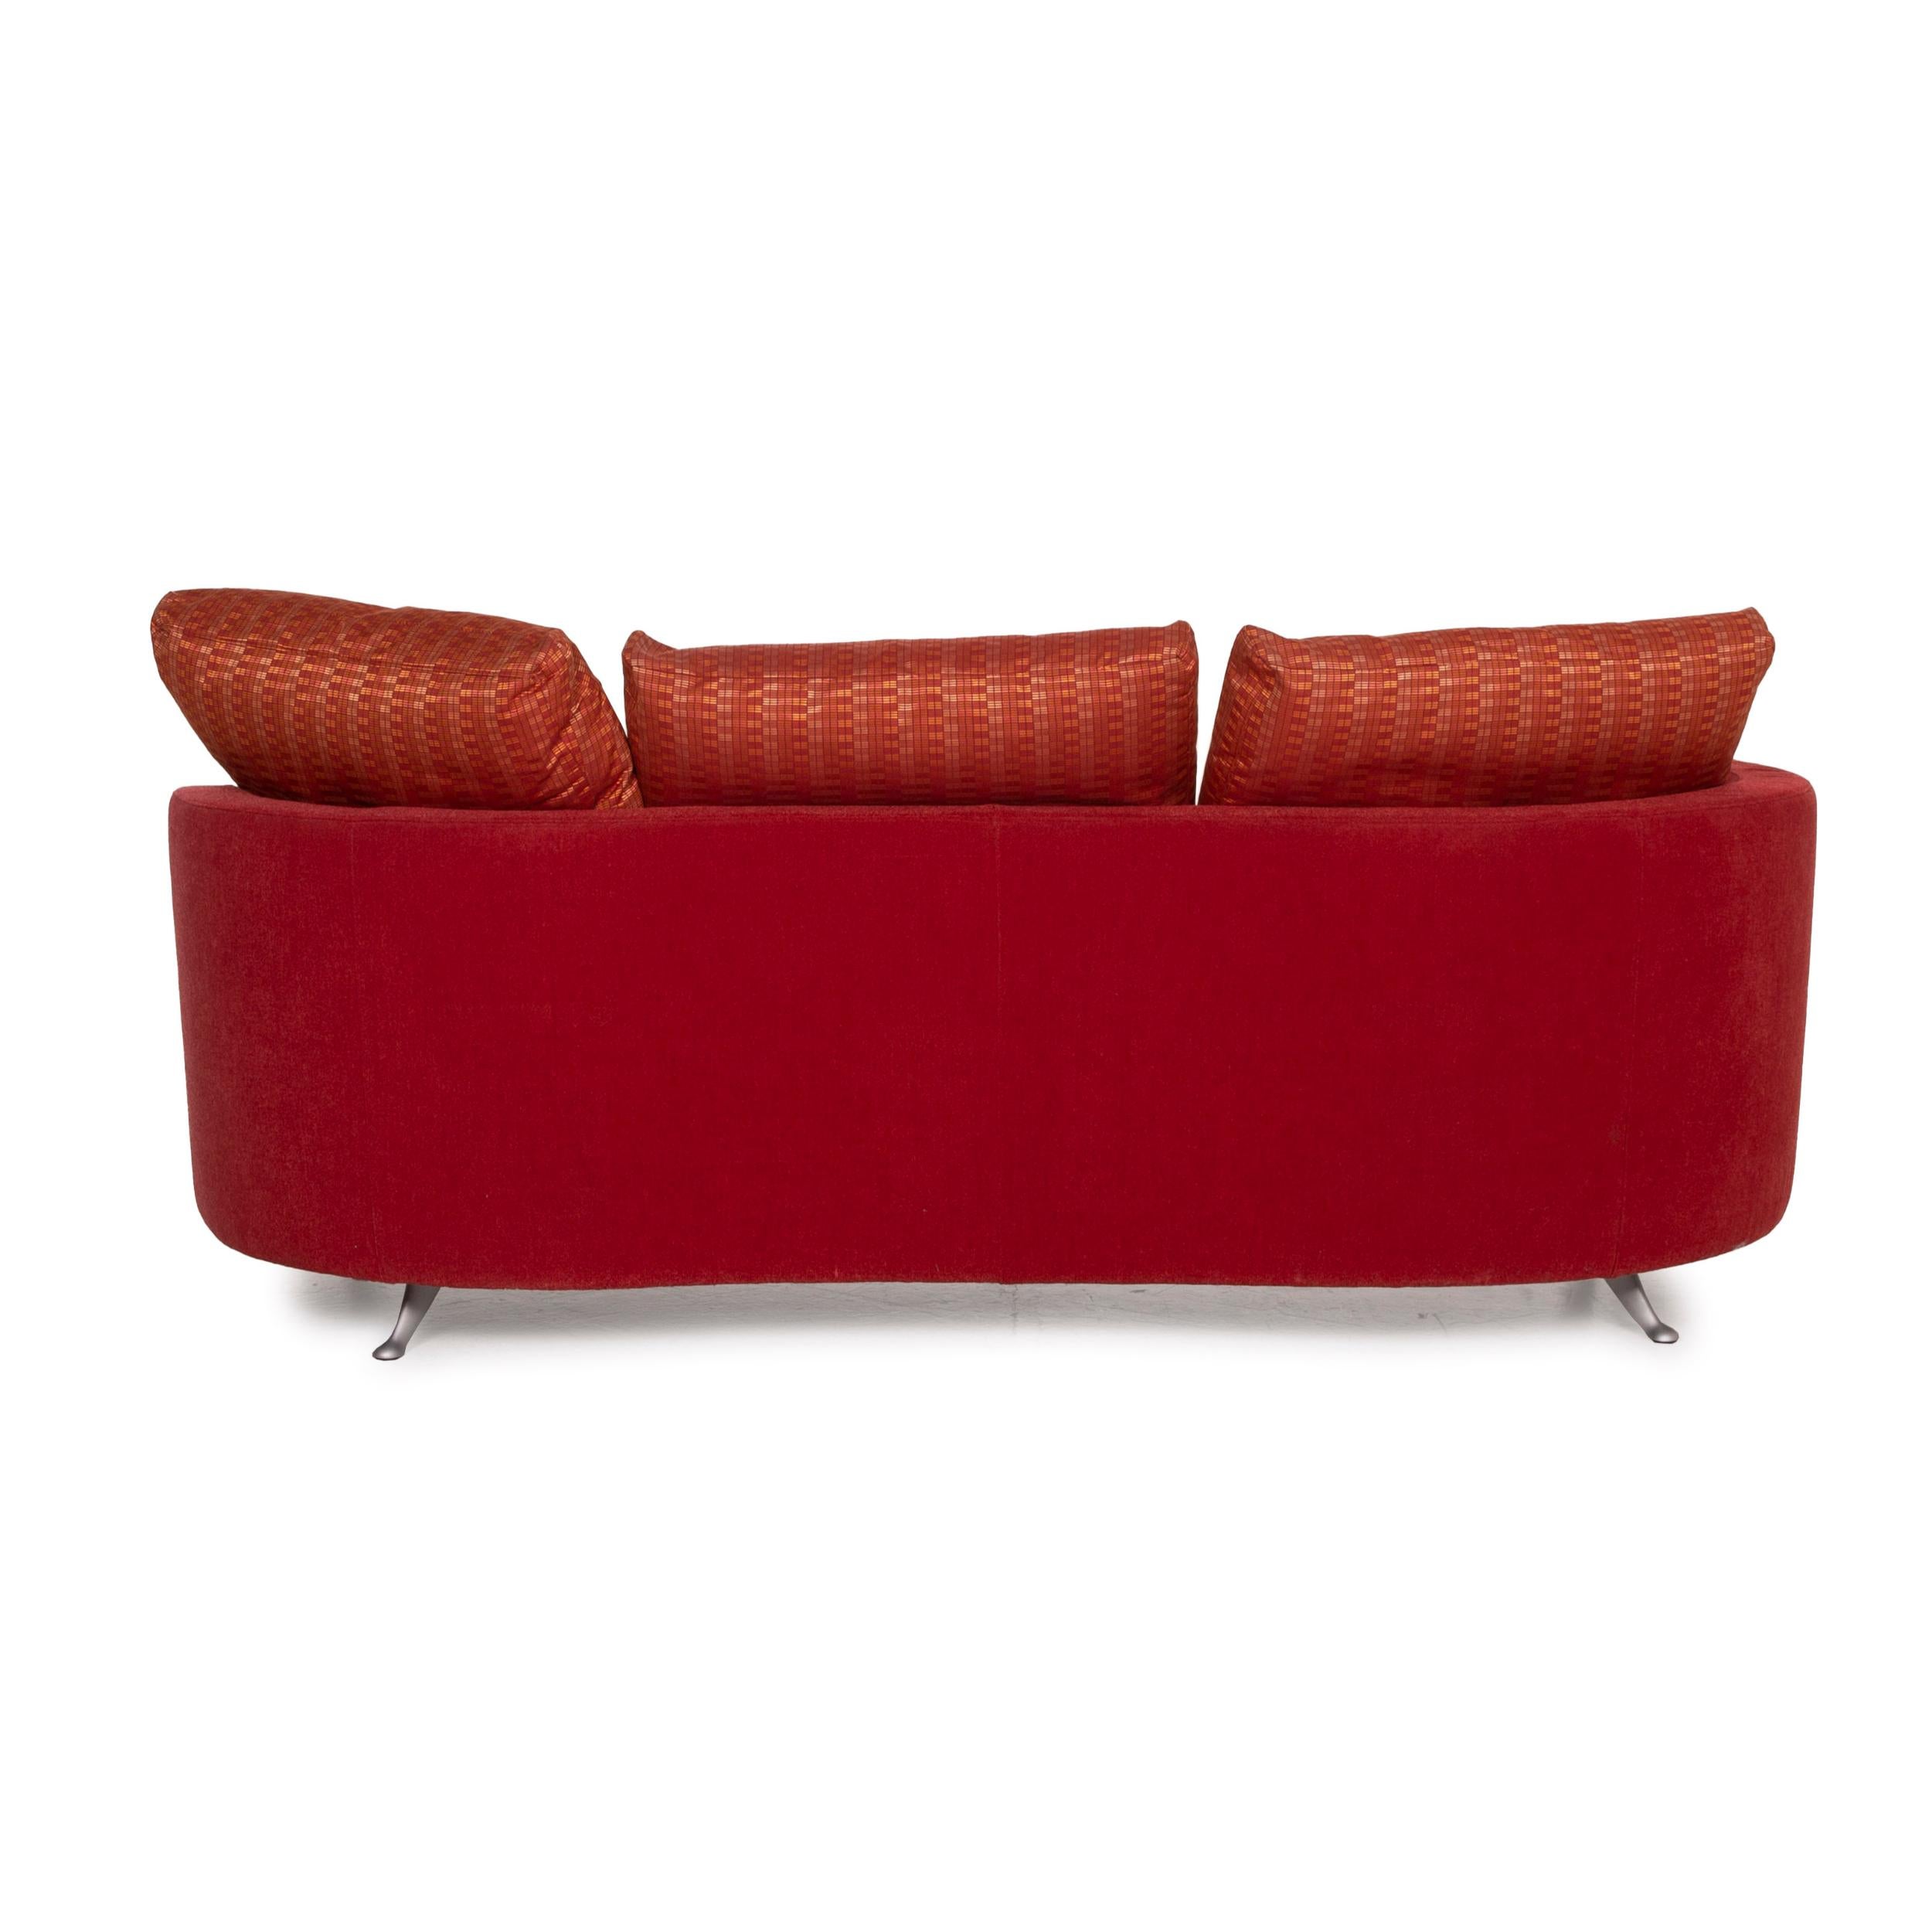 Rolf Benz 2500 Red Three-Seater Fabric Sofa Incl. Ottoman Set 3